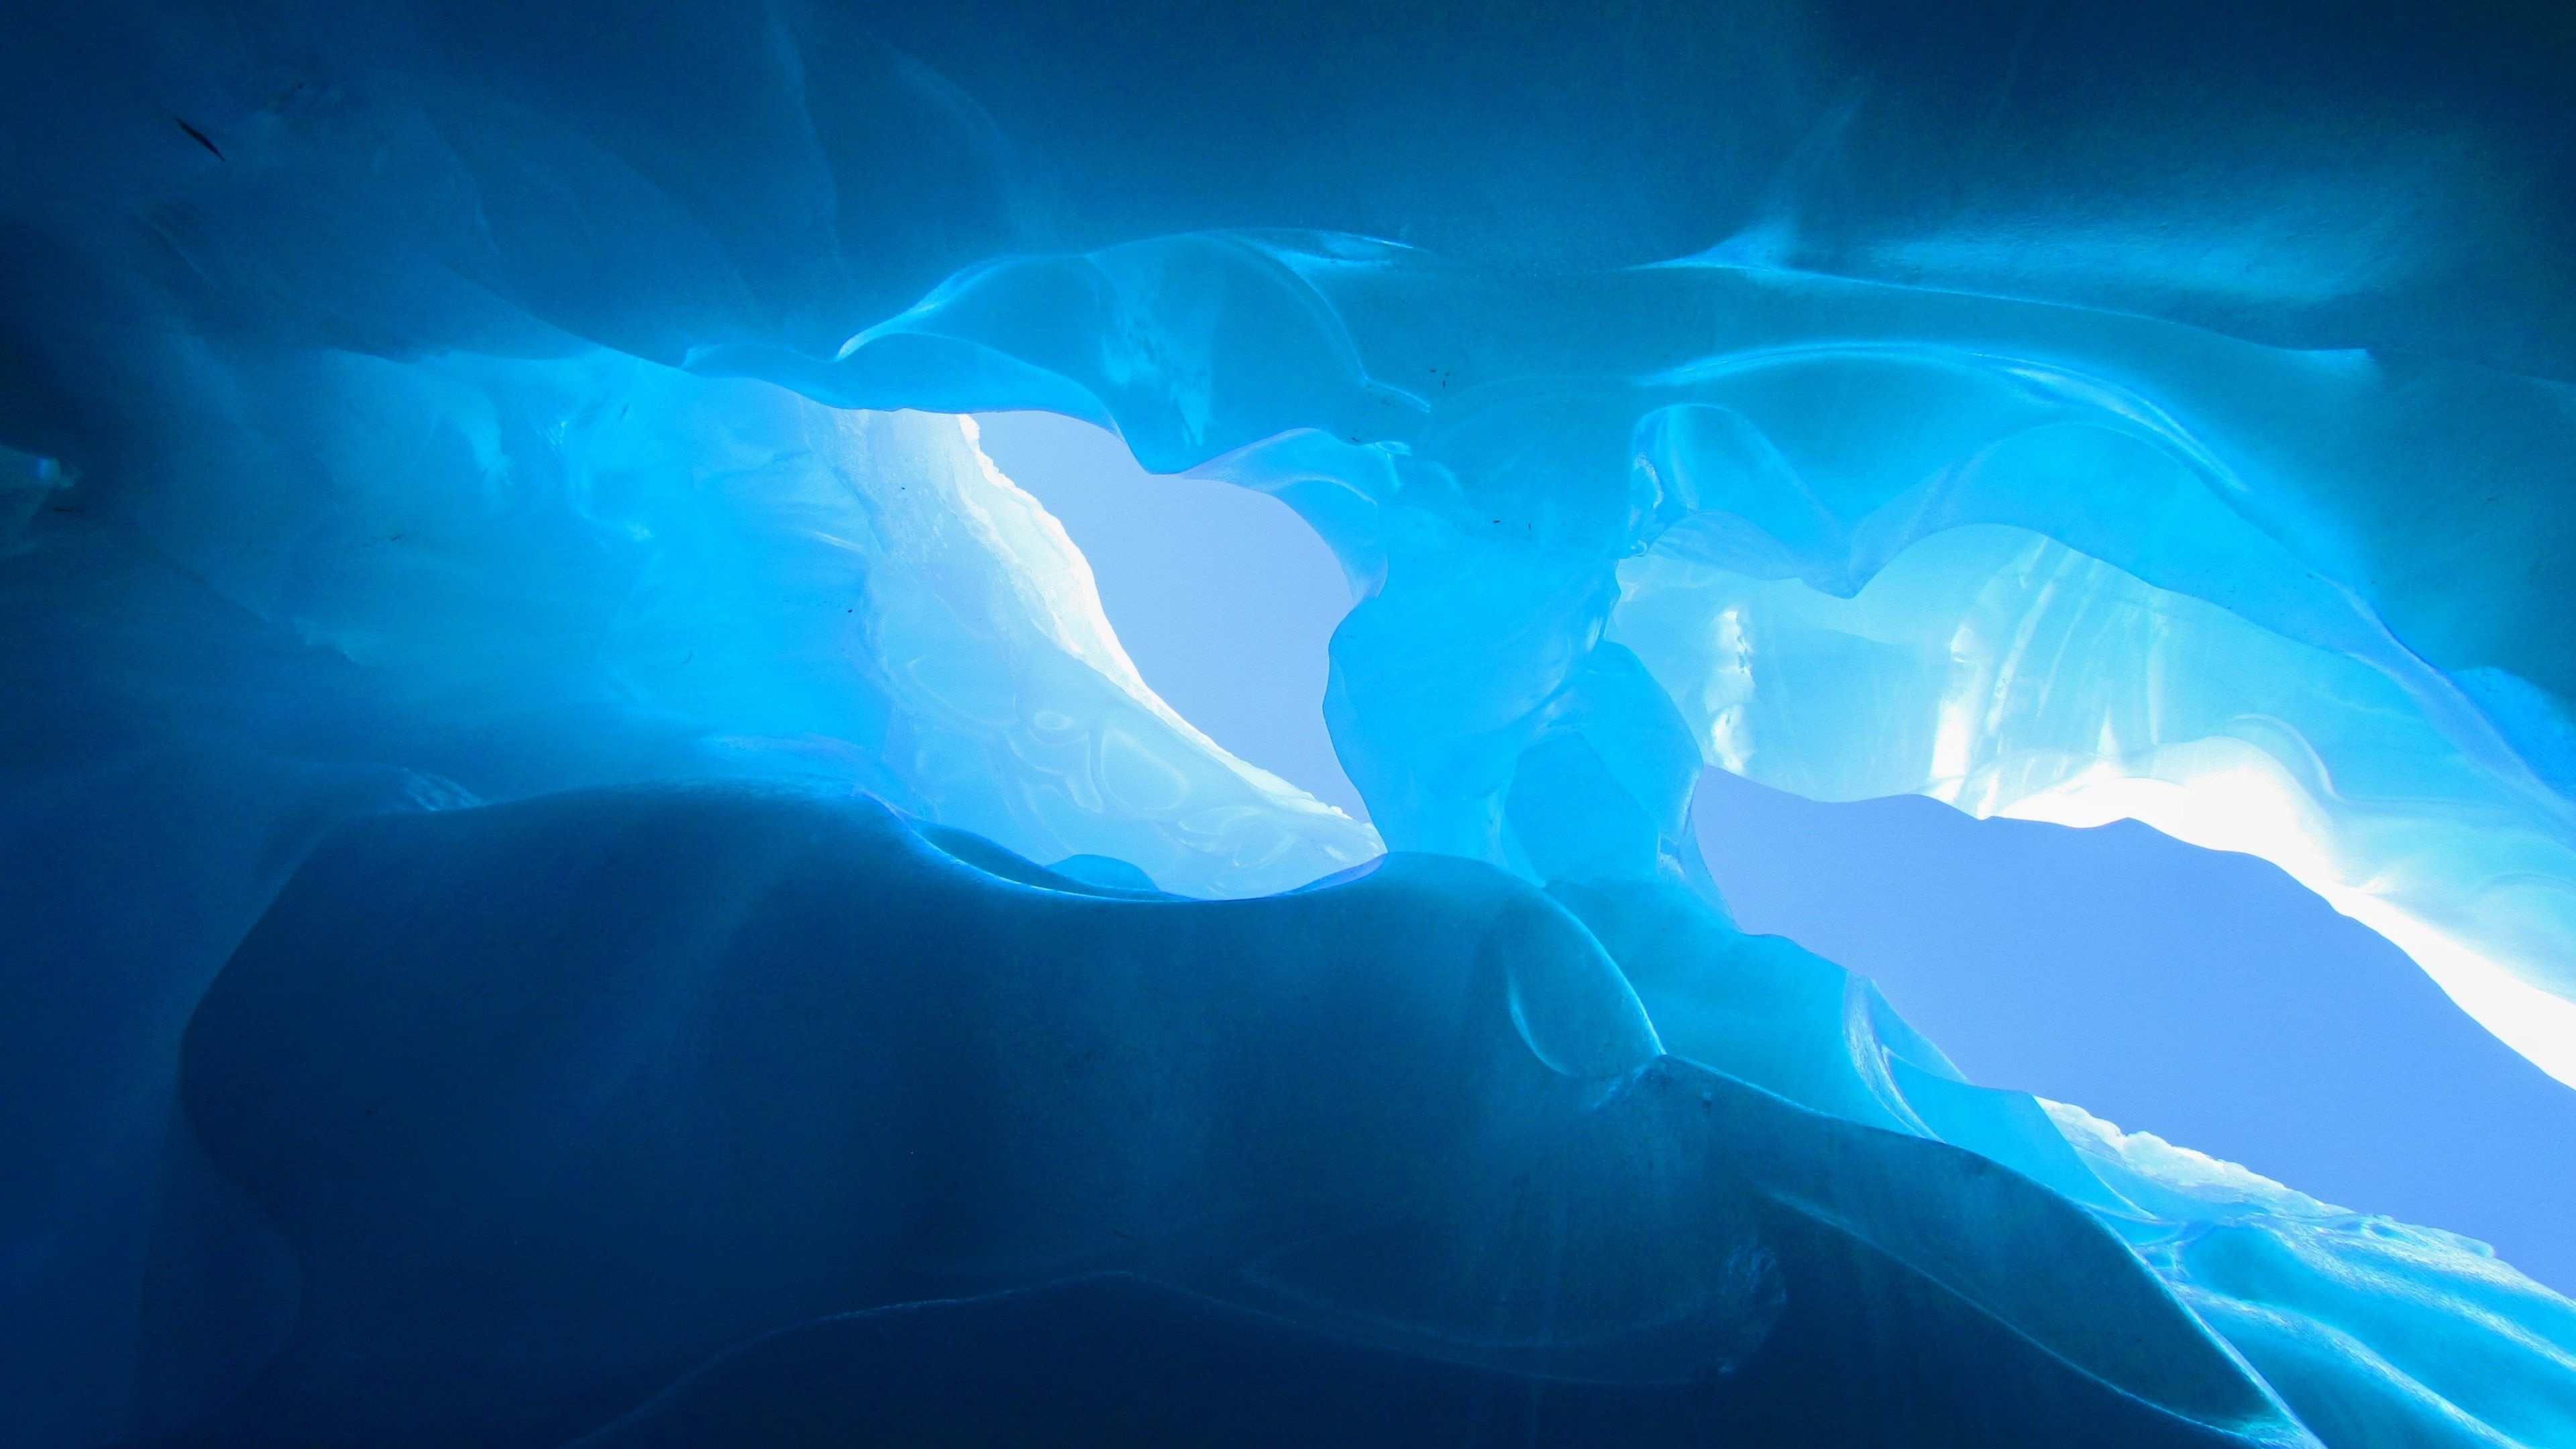 Glistening ice caves, Frozen marvels, Nature's ice sculptures, Crystal clear beauty, 3840x2160 4K Desktop